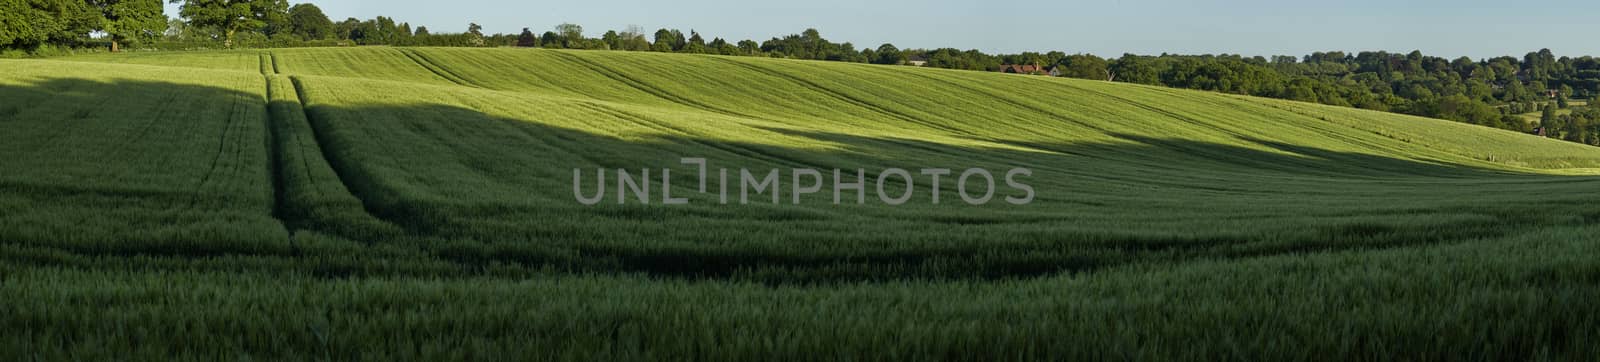 Panoramic view of green wheat growing in a field  in The Chiltern Hills,England